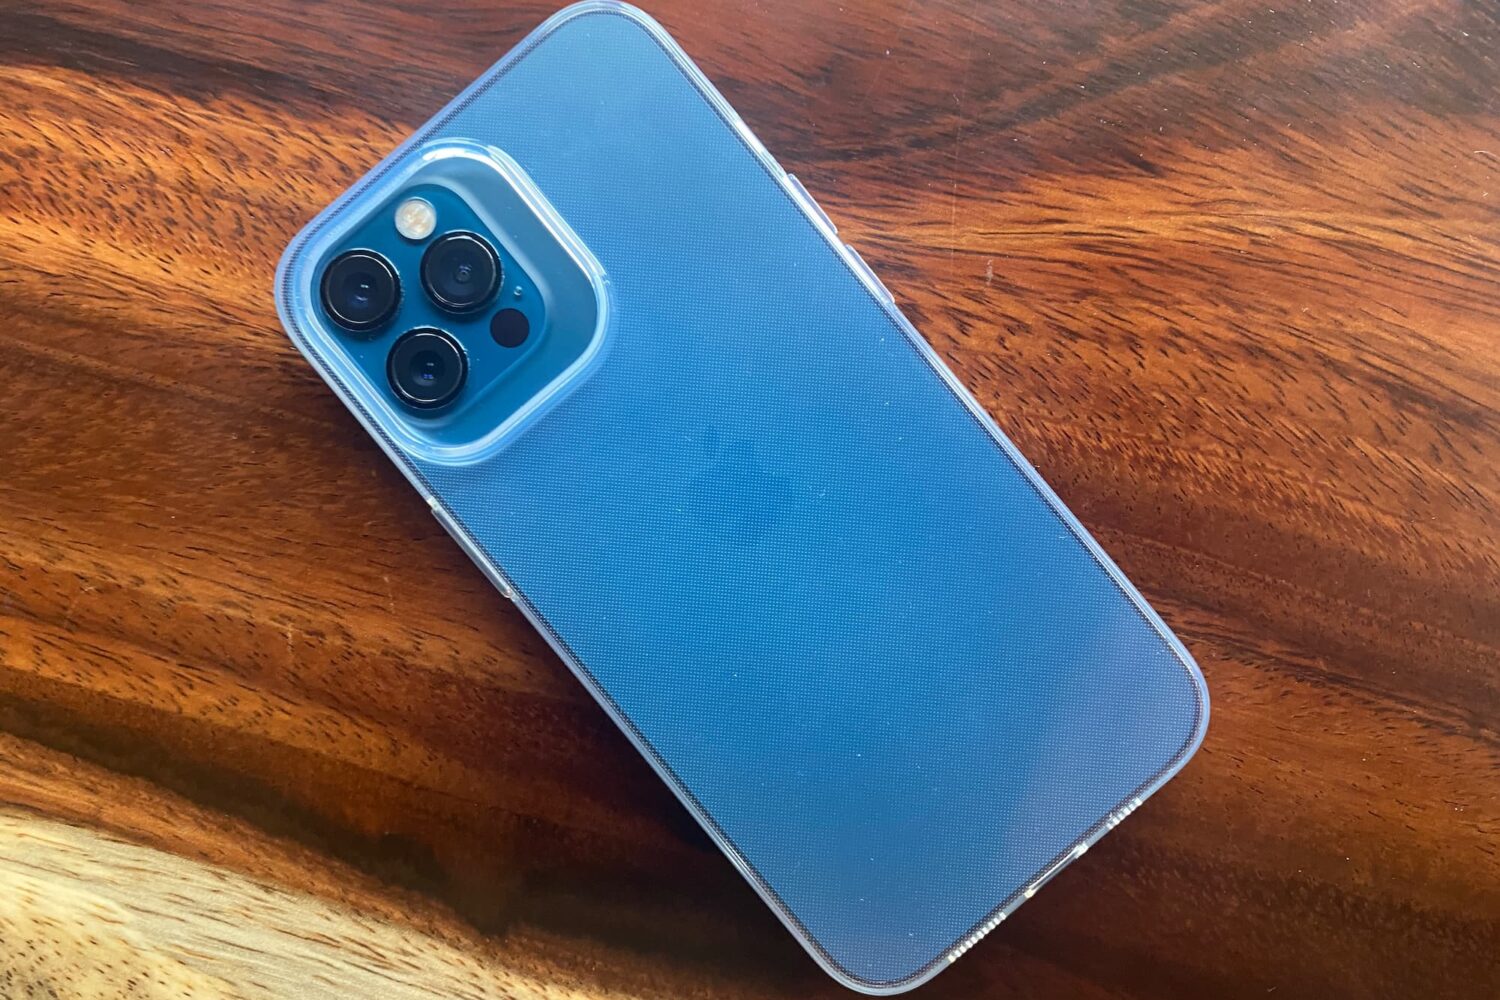 An image showing a massive rear camera bump cutout on a minimalist iPhone 13 case from Totallee